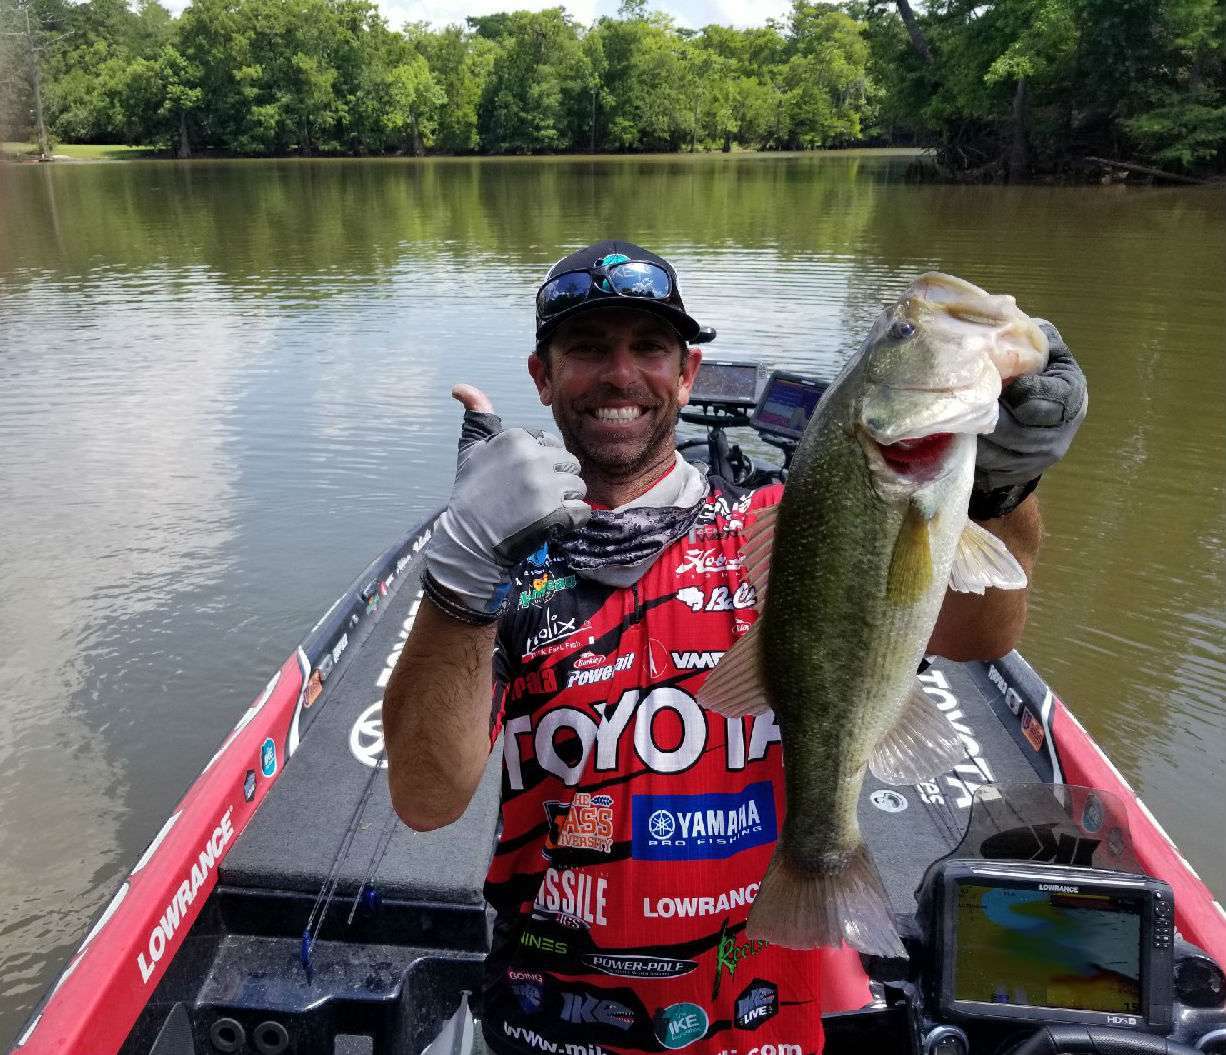 <h4>Michael Iaconelli</h4>
Pittsgrove, New Jersey
<br>Classic History: 19 appearances, 1 win (2003 Louisiana Delta)<BR>Qualified via the Elite Series<br>2018 AOY Rank: 17
